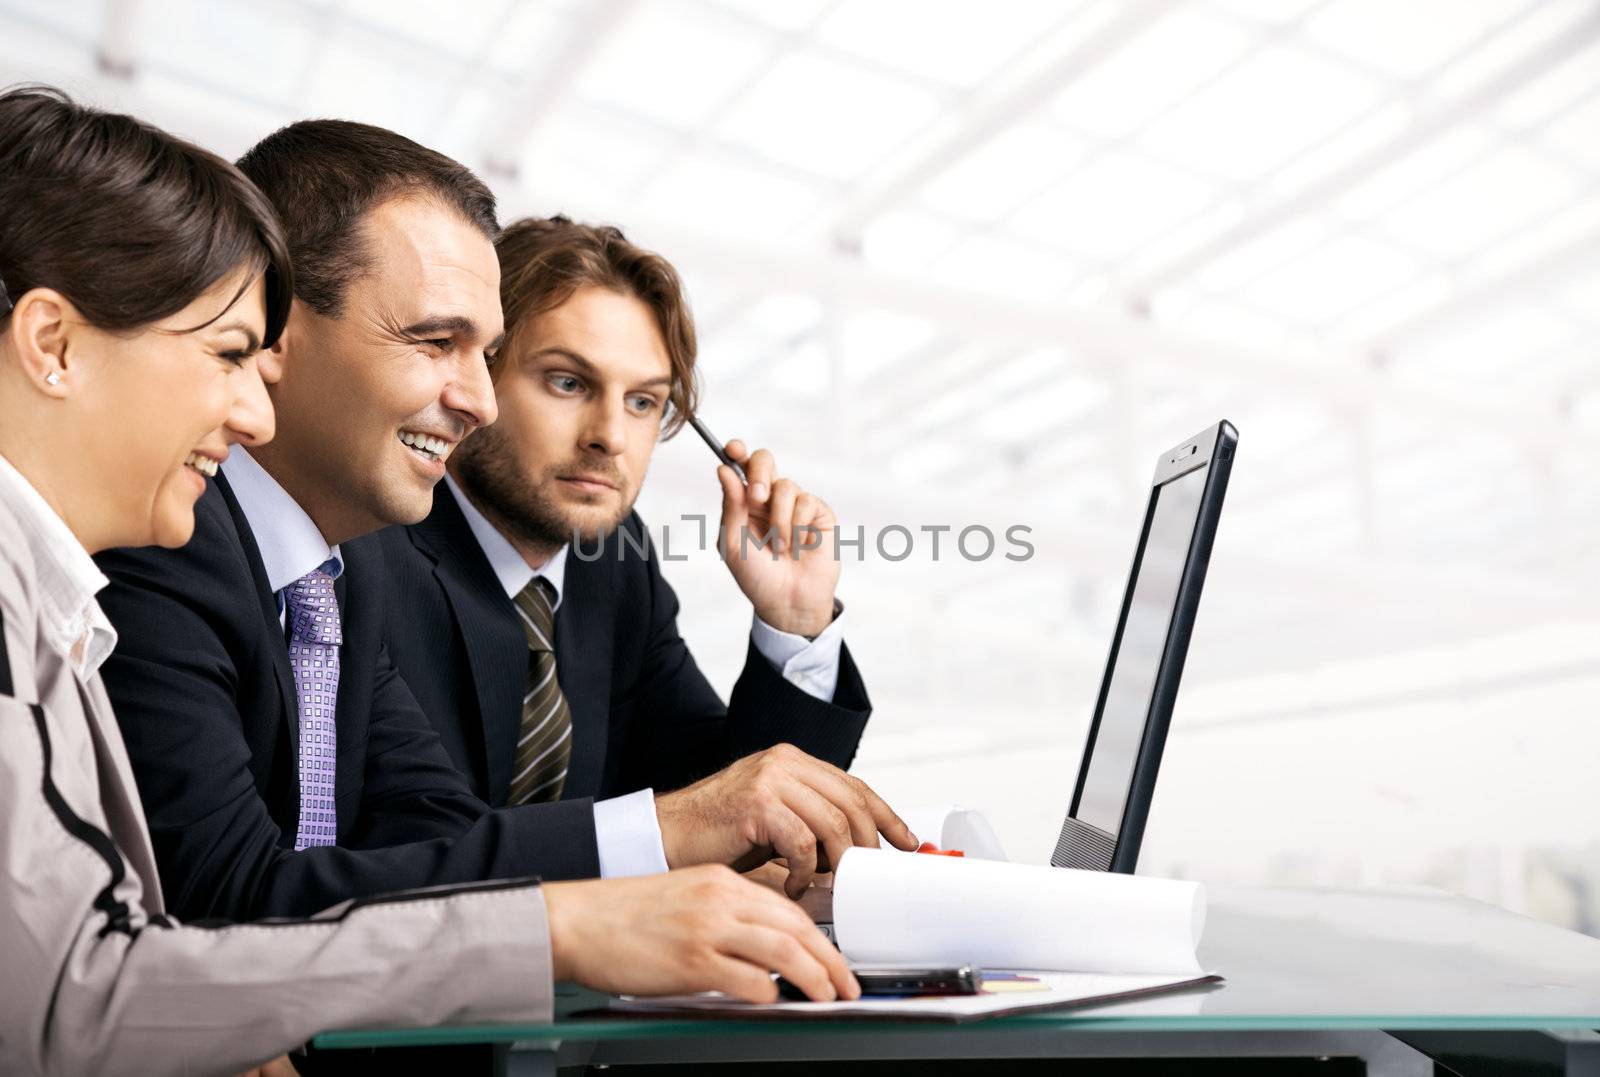 Team of three businesspeople sitting behind laptop, looking at the laptop, copyspace